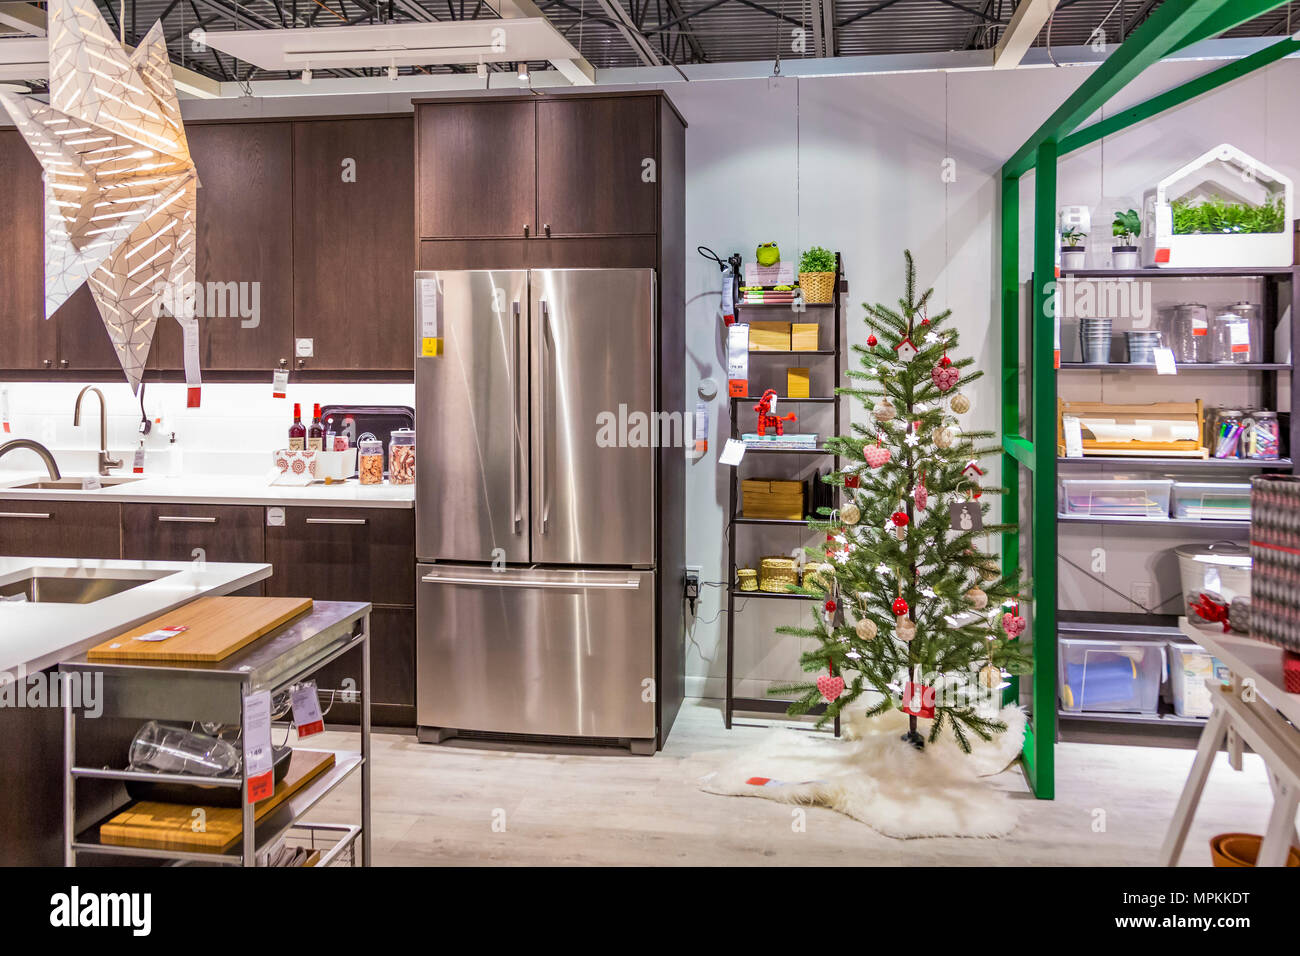 Sample kitchen design layout in showroom inside an Ikea store in the US Stock Photo